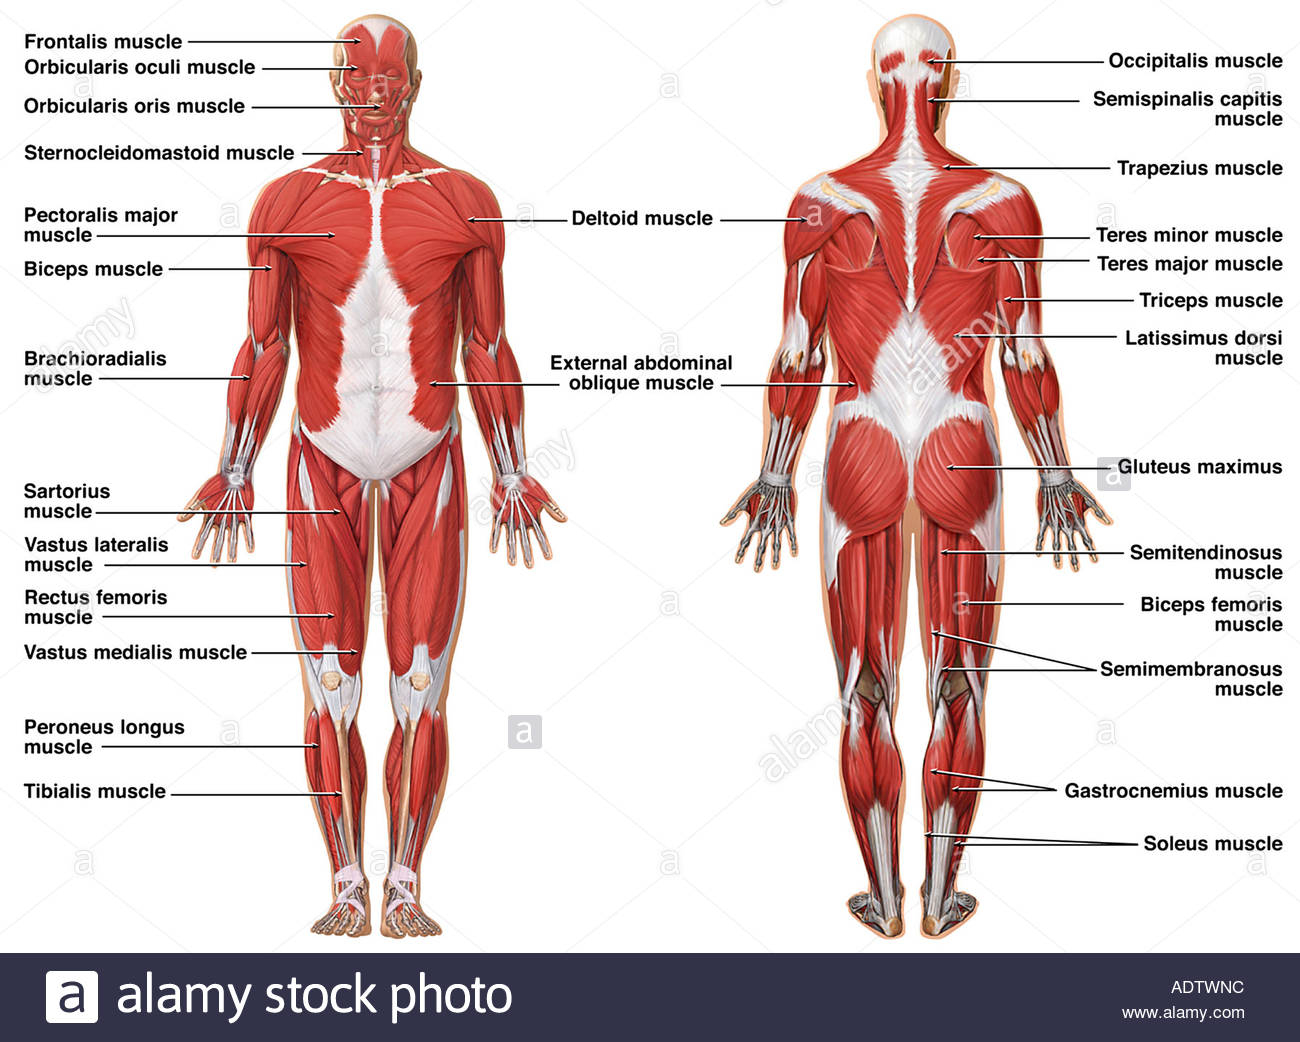 Human Muscle Diagram Muscular System Drawing At Getdrawings Free For Personal Use